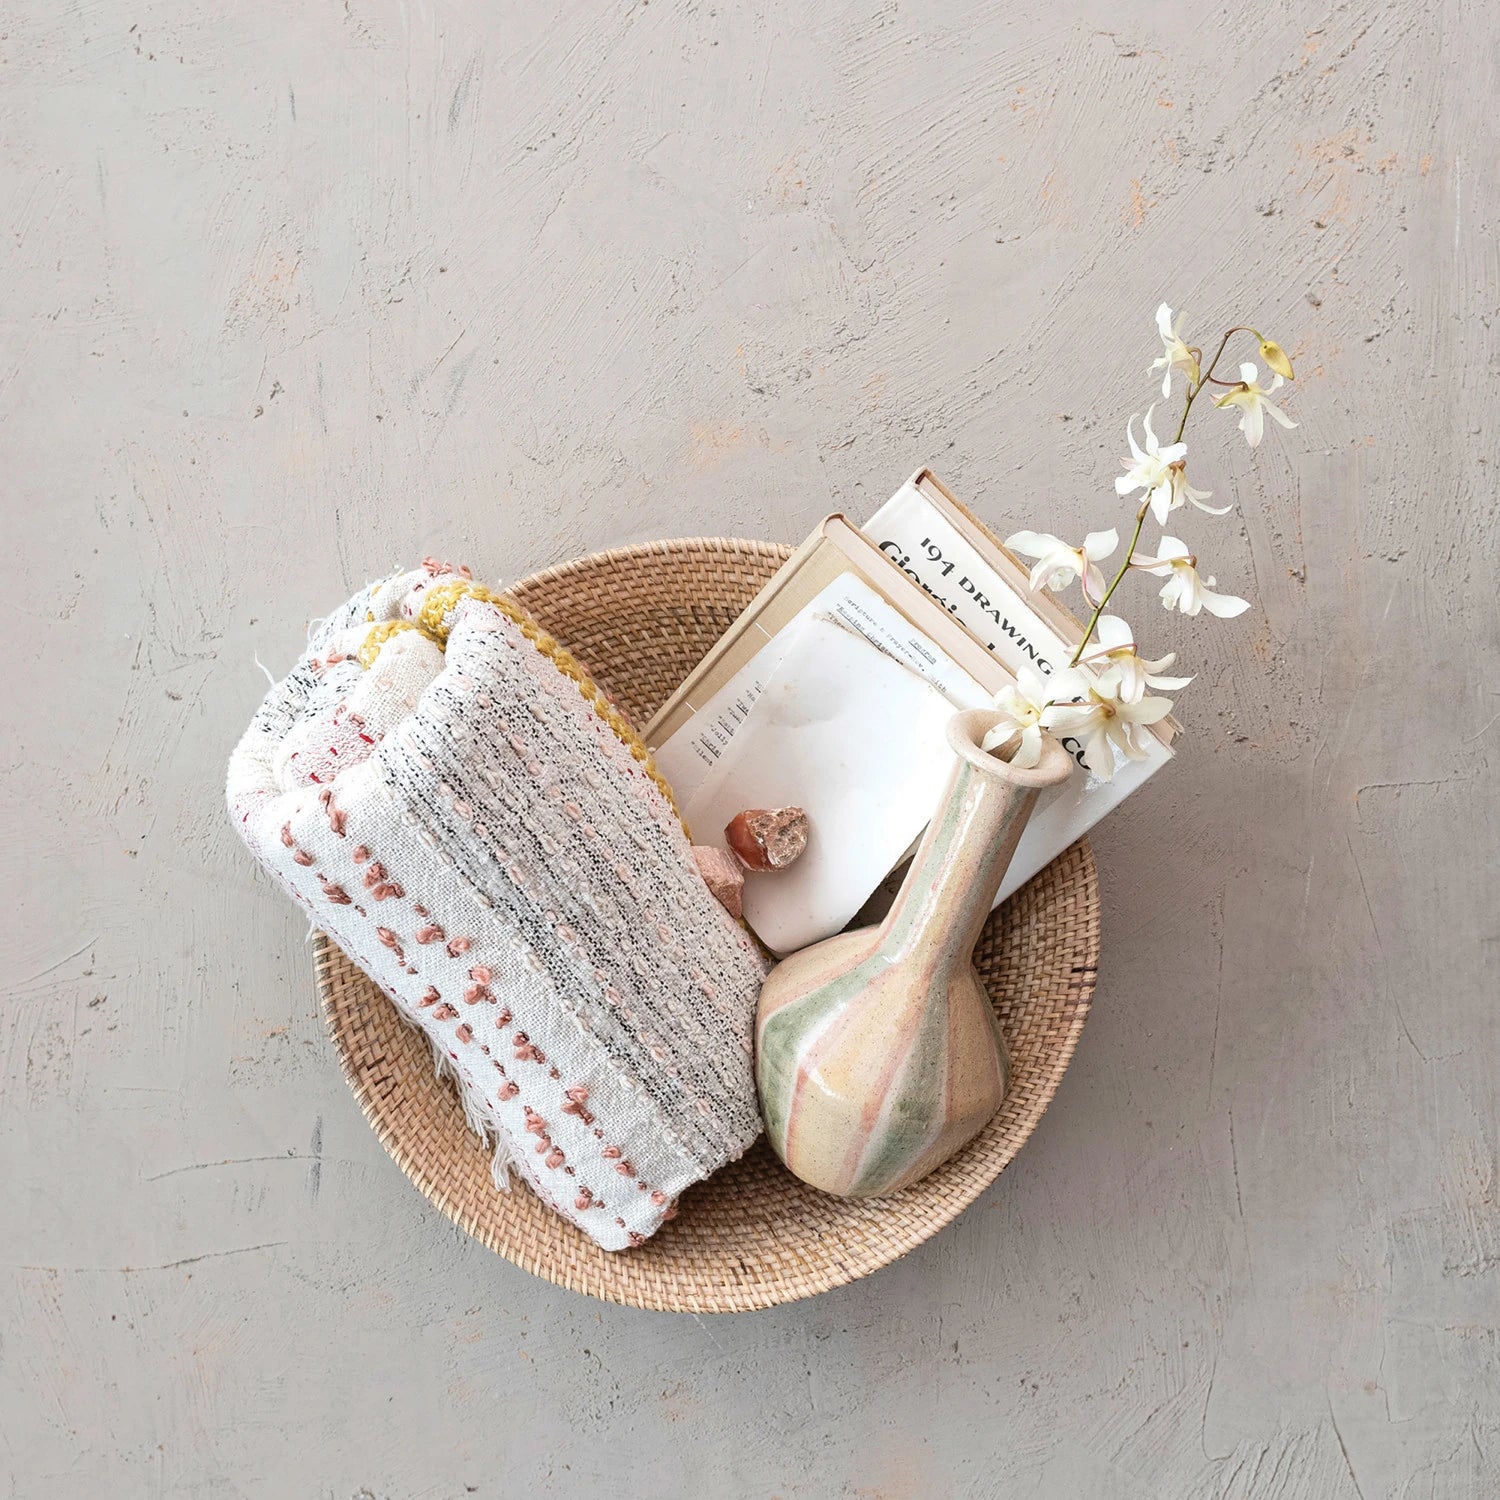 Cotton throw basket folded and displayed in a basket with a bud vase and books.